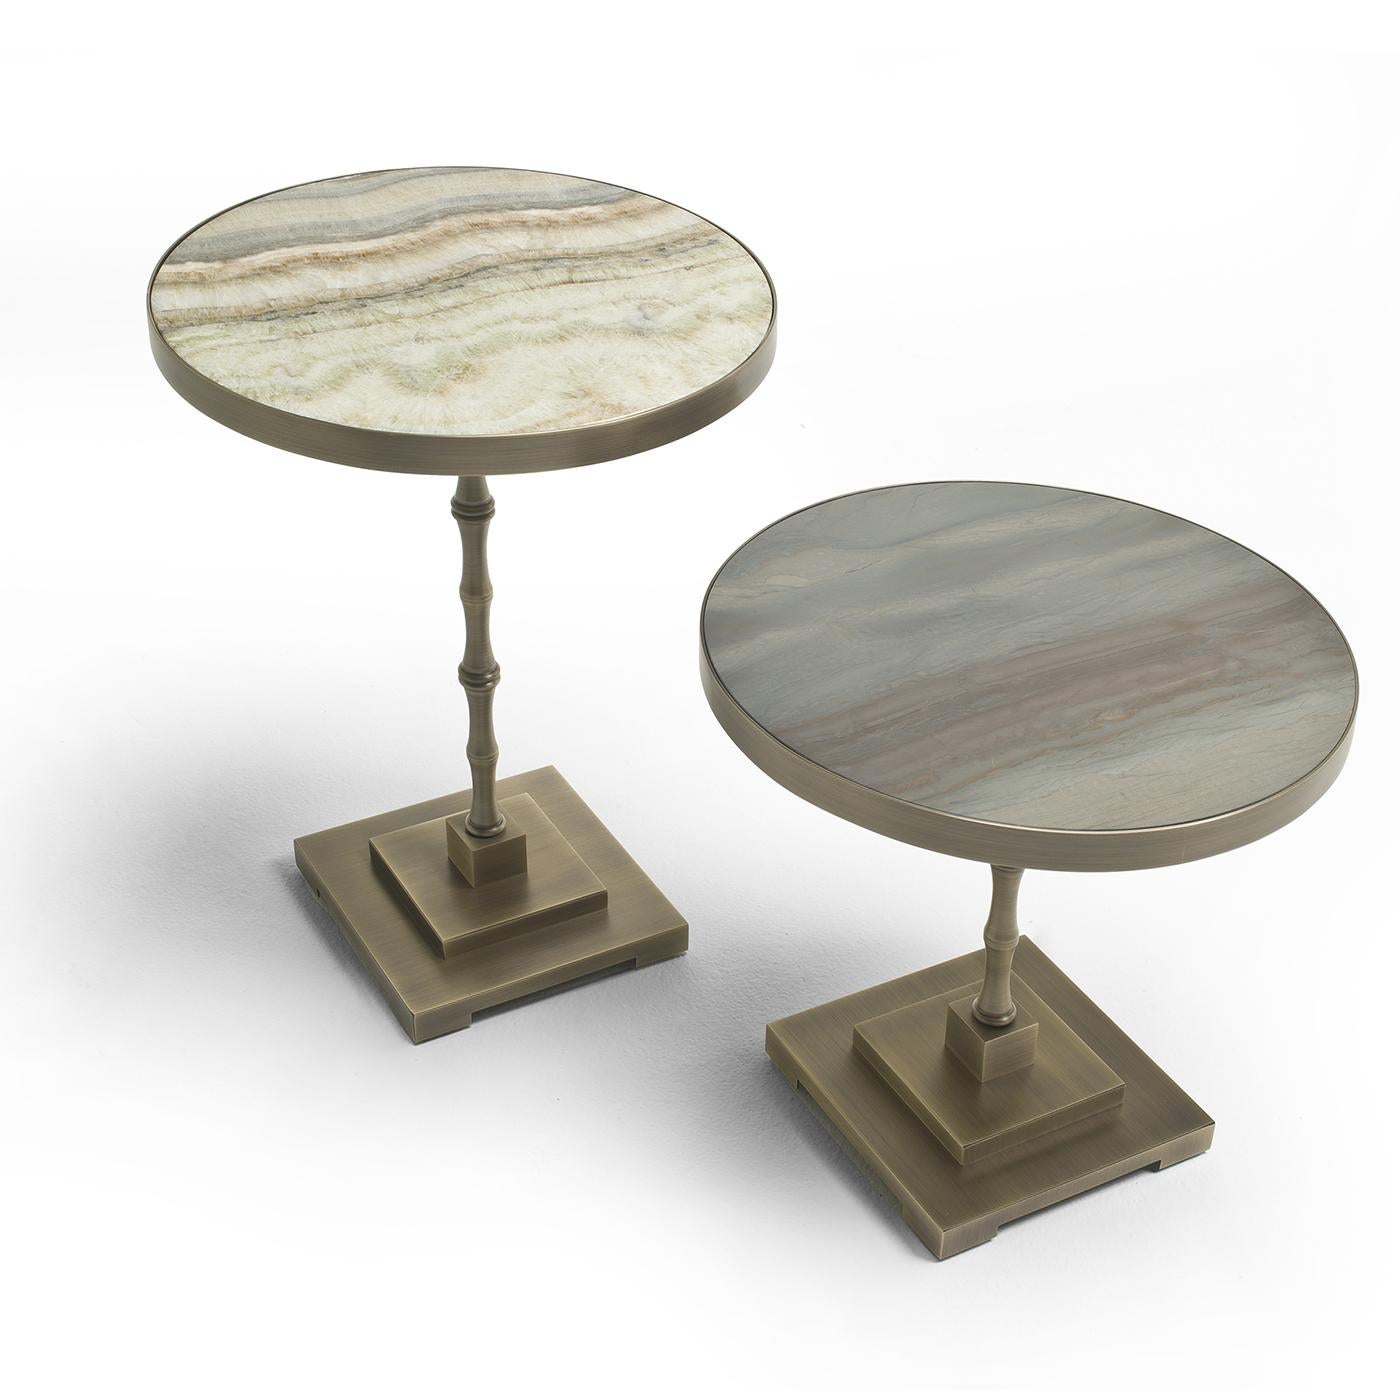 A world of inspirations come together in the Marmora Side Table. On a stacked square base, the table stands on a bamboo-inspired stem and is topped with a round surface. The tabletop is crafted in onice marble with a velvet-polished finish. The